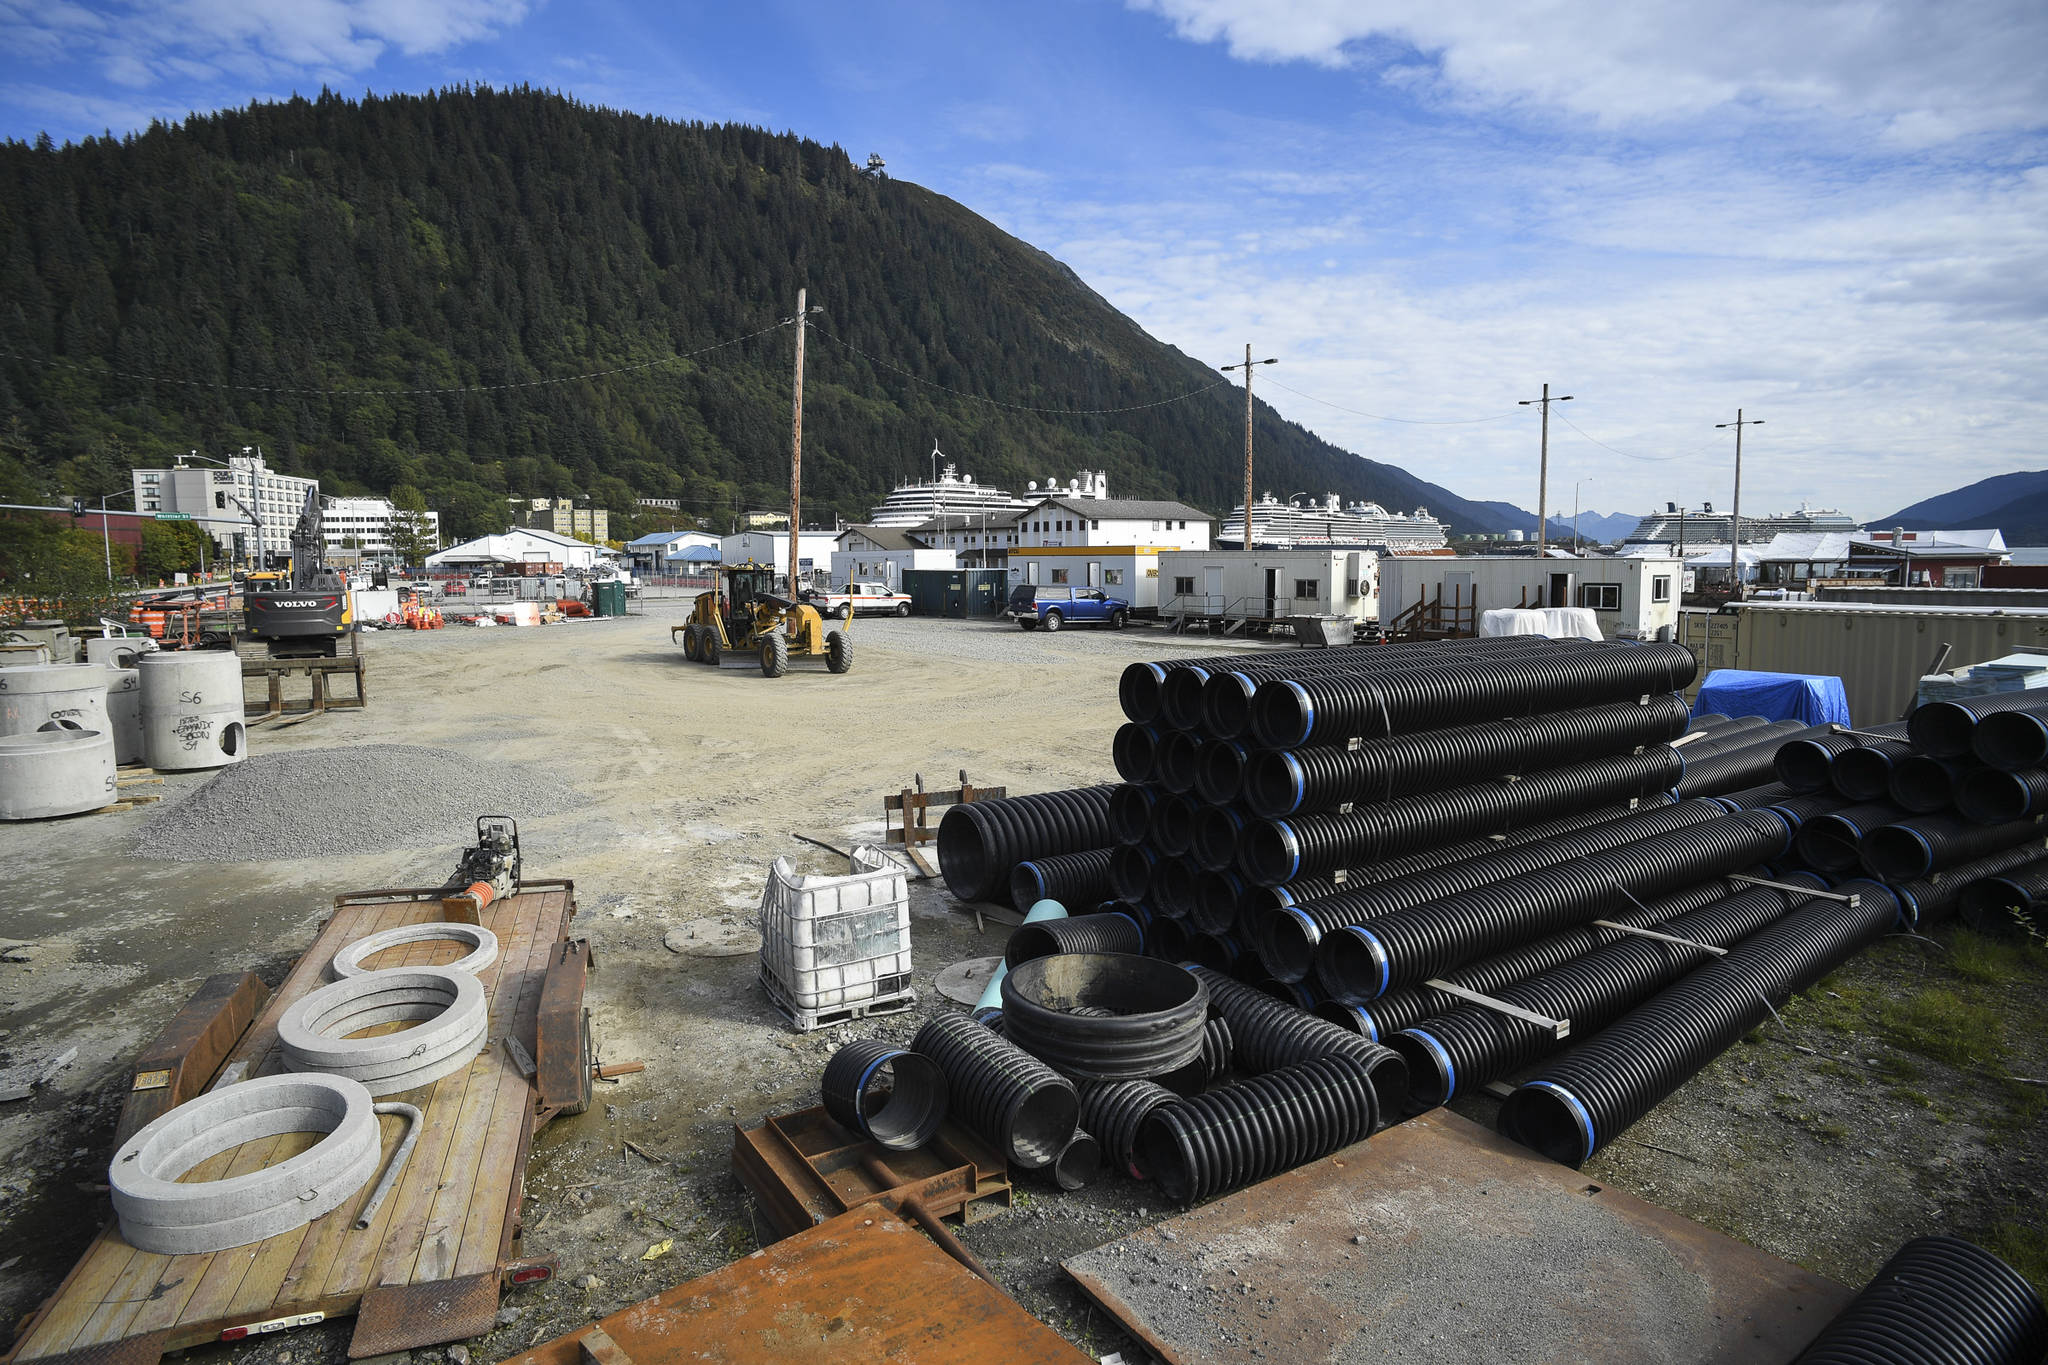 The Alaska Mental Health Trust Authority has sold its subport land along Egan Drive in downtown Juneau to NCL Bahamas Ltd., which does business as Norwegian Cruise Lines, for $20 million. Norwegian Cruise Lines has until Sept. 19 to fulfill all the requirements of the bidding process, which includes paying 10 percent of the purchase price. (Michael Penn | Juneau Empire)